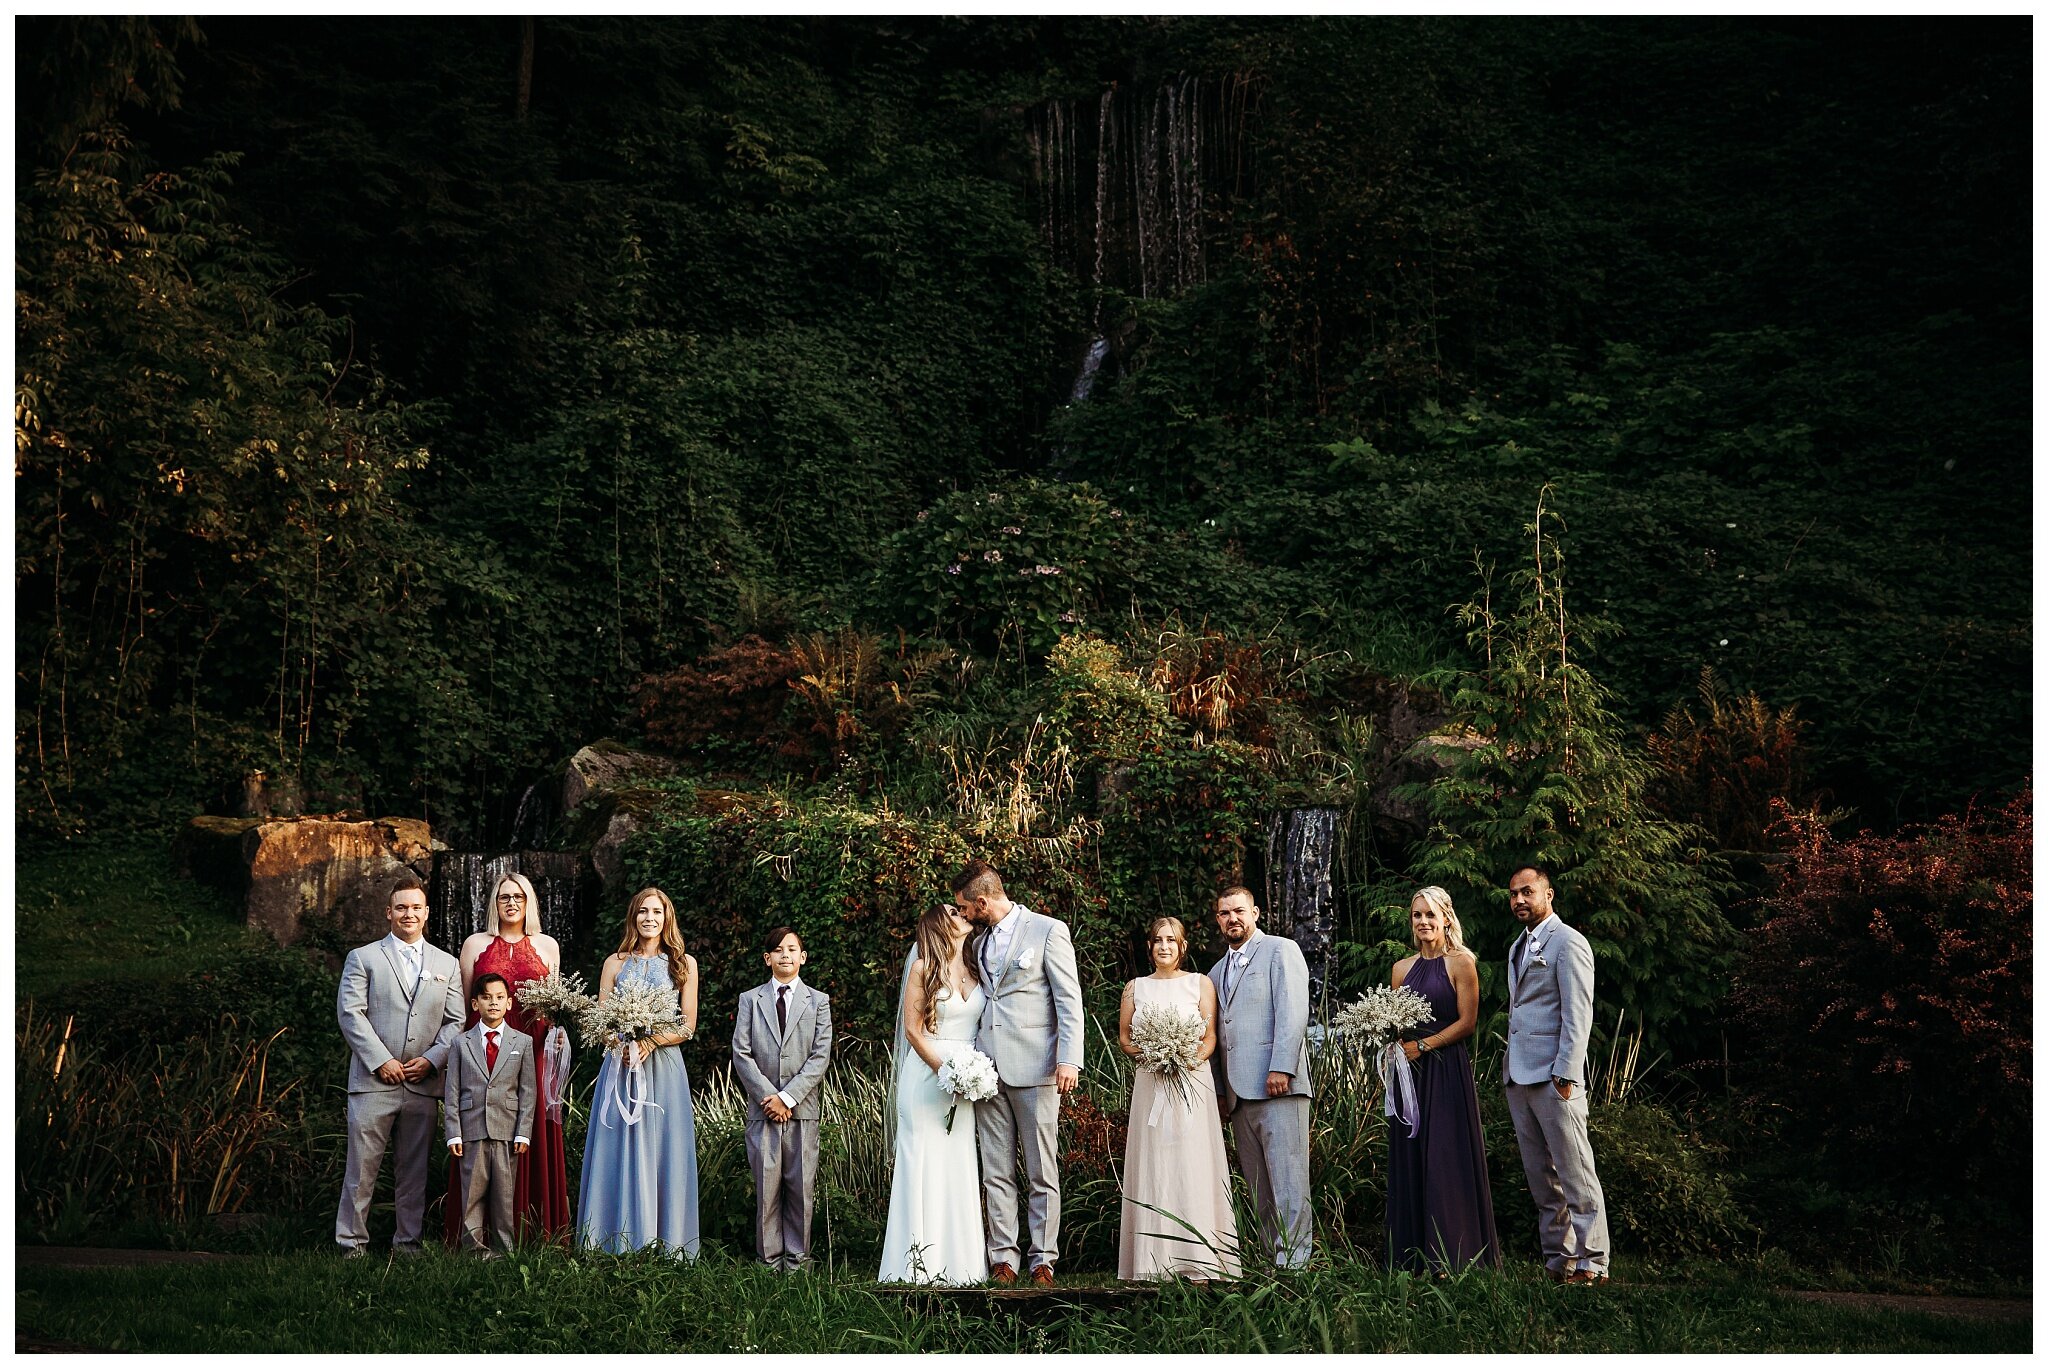 Top Rated Fraser Valley Wedding Photographer at The Falls Golf Course Wedding Venue